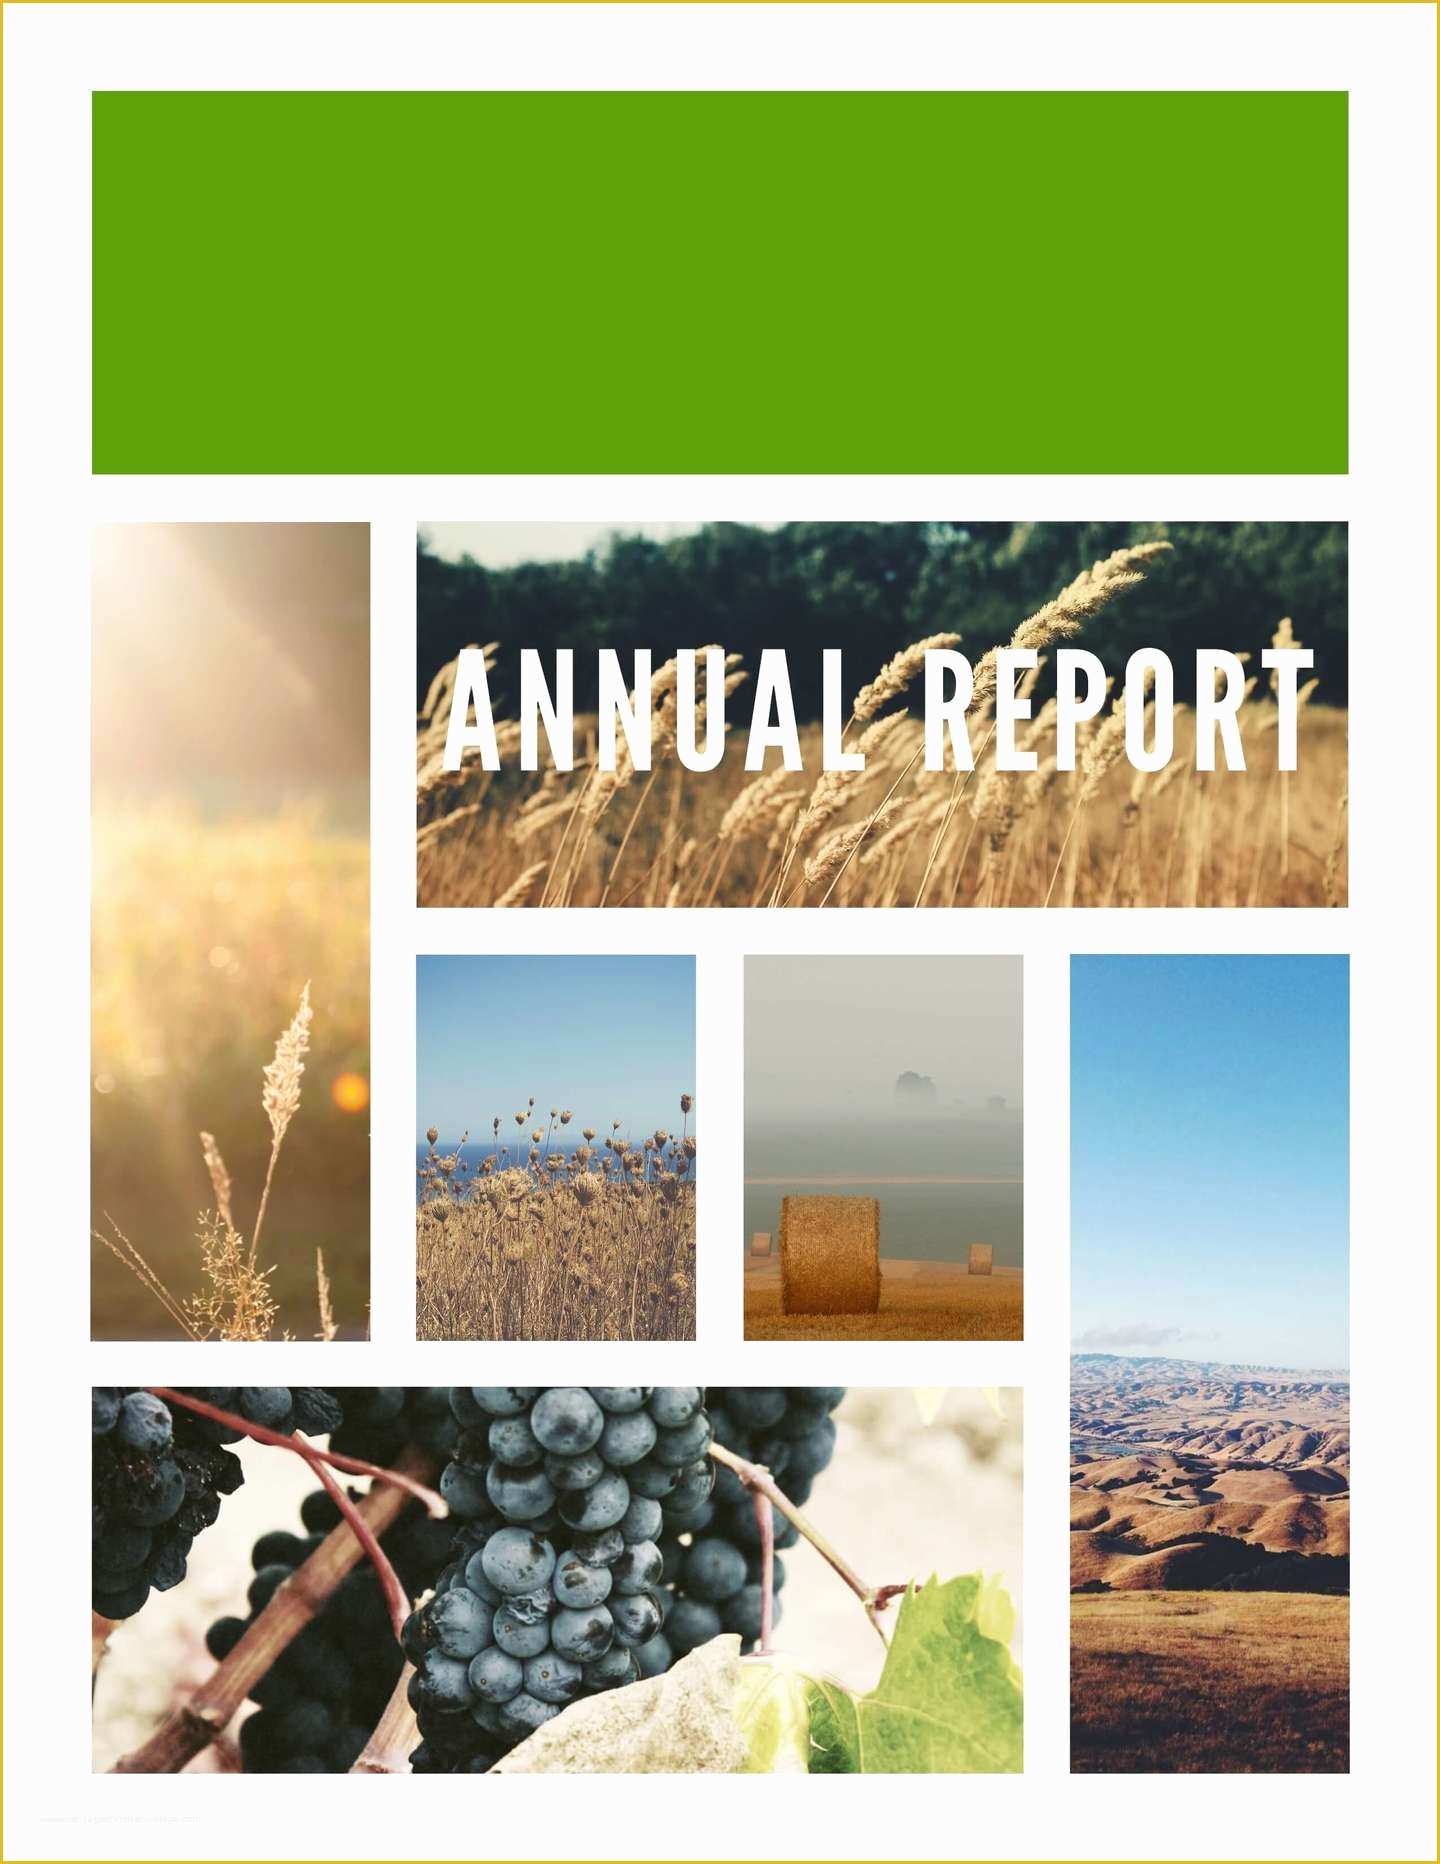 Free Annual Report Template Of Free Annual Report Templates & Examples [6 Free Templates]